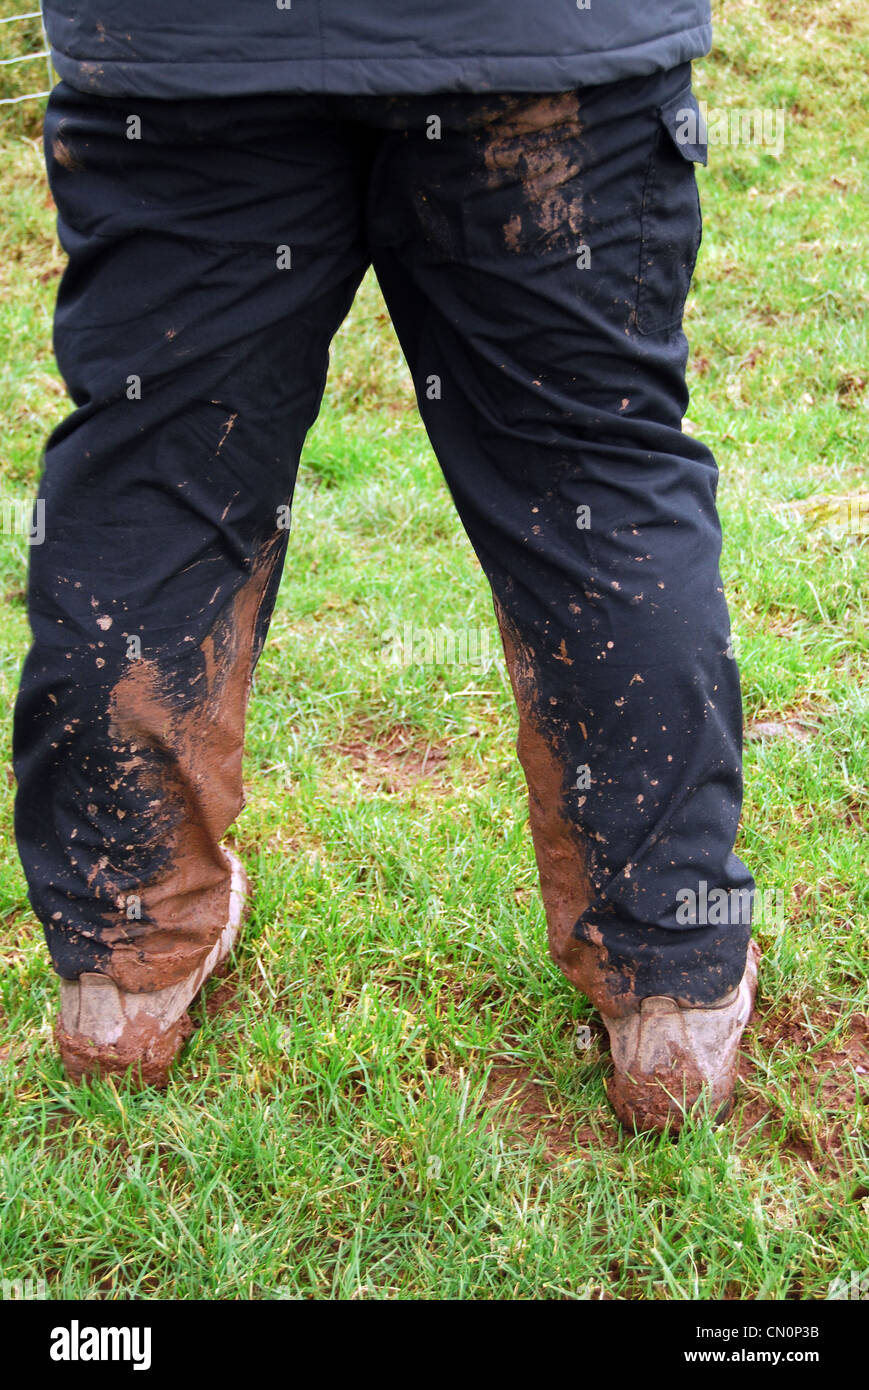 Gaiters High Resolution Stock Photography and Images - Alamy